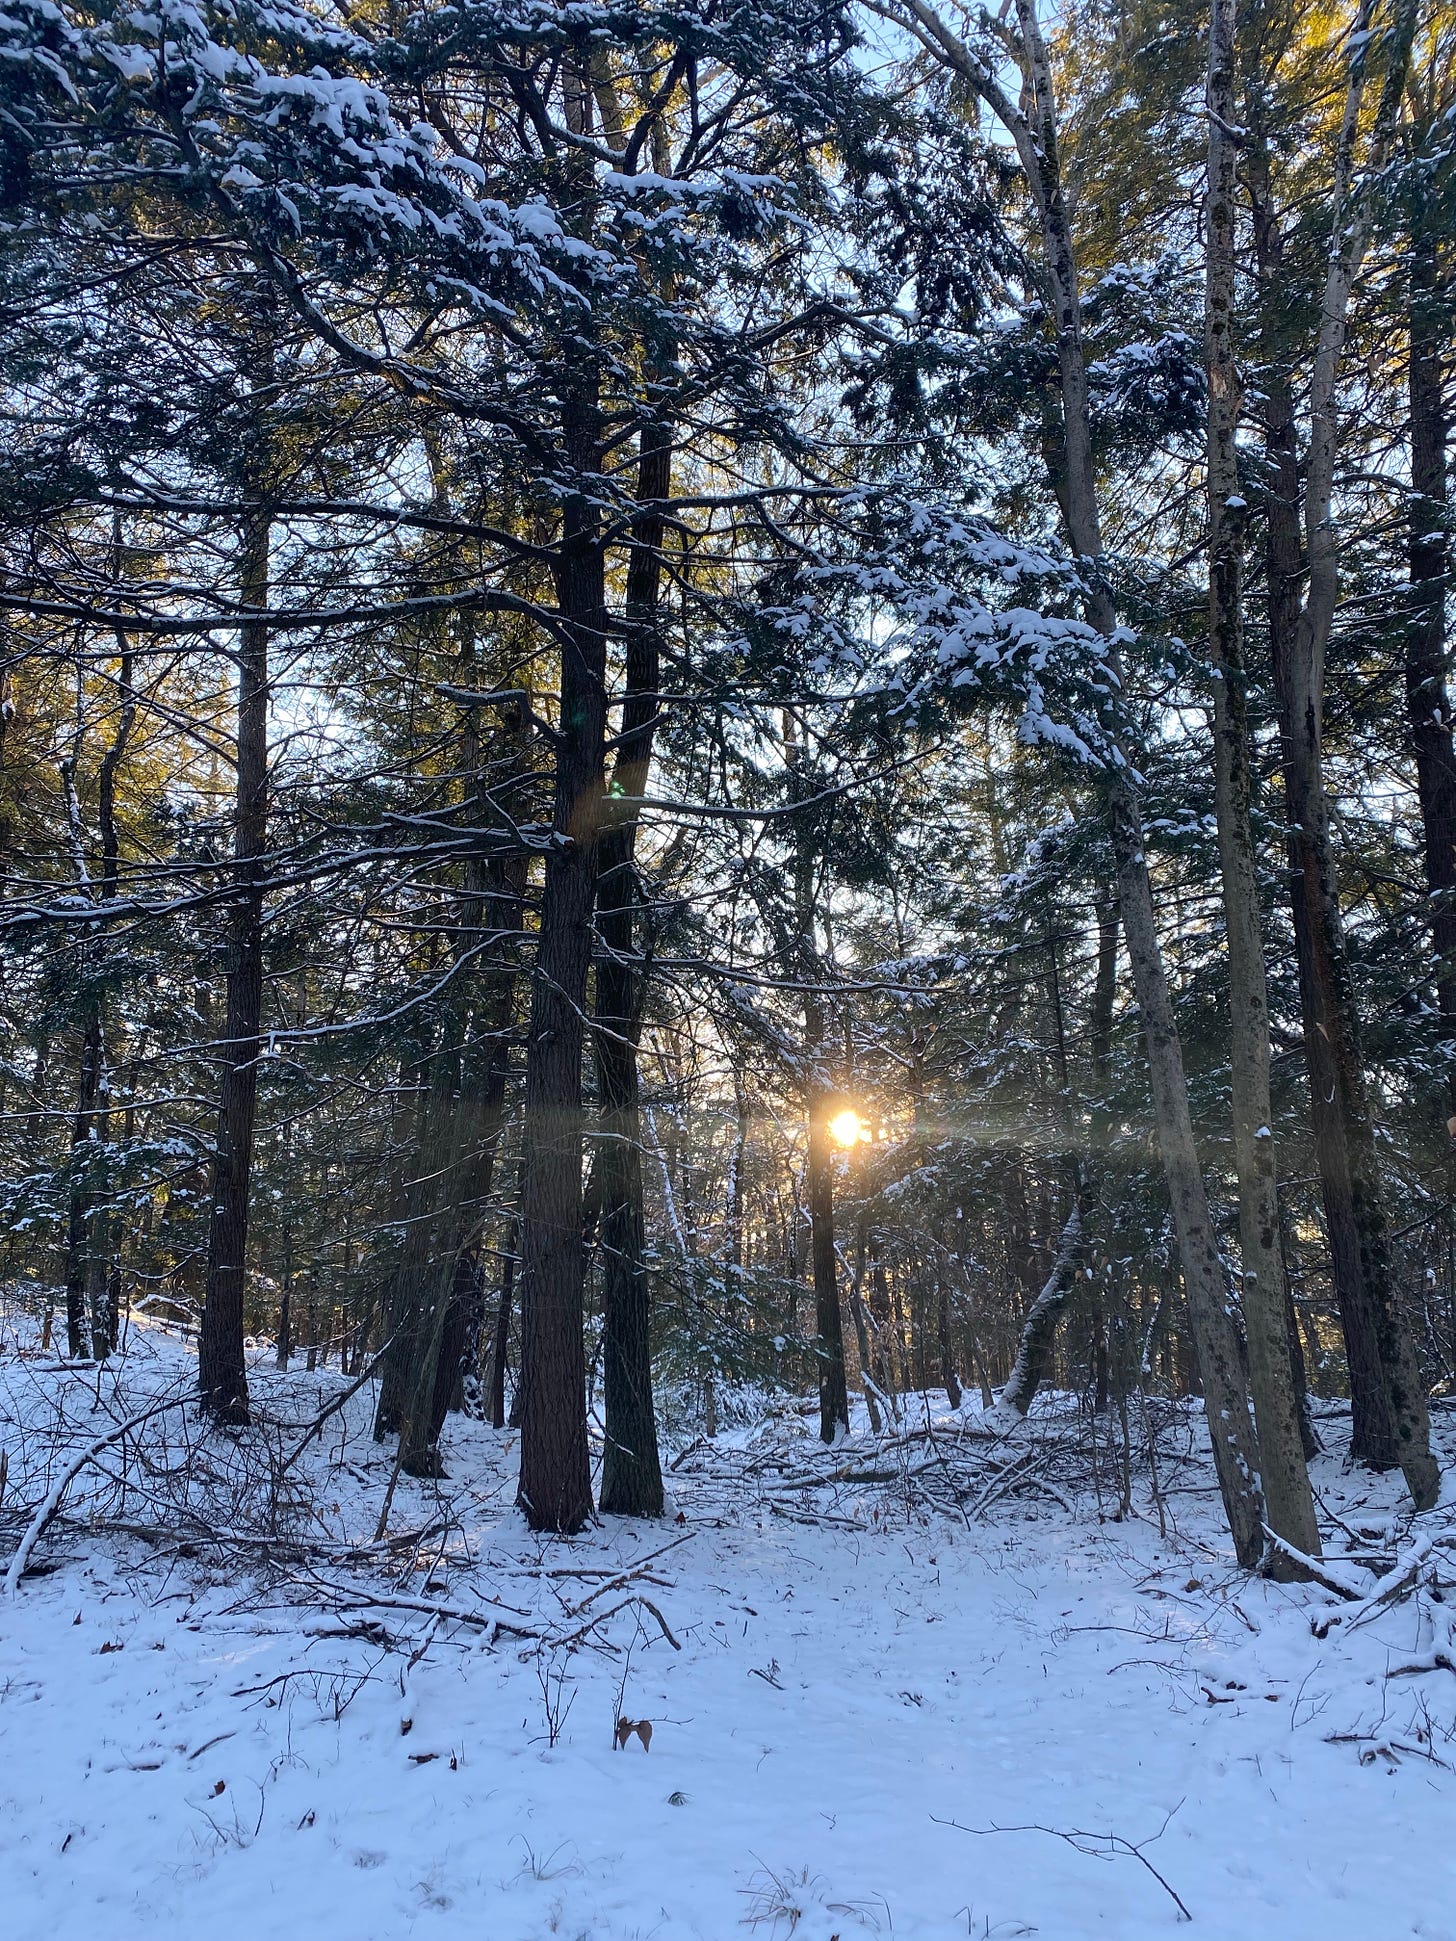 A snowy evergreen forest. The ground is snow-covered, as are the branches of many trees. The sun is visible behind the trees, low on the horizon, lighting up the lower branches.